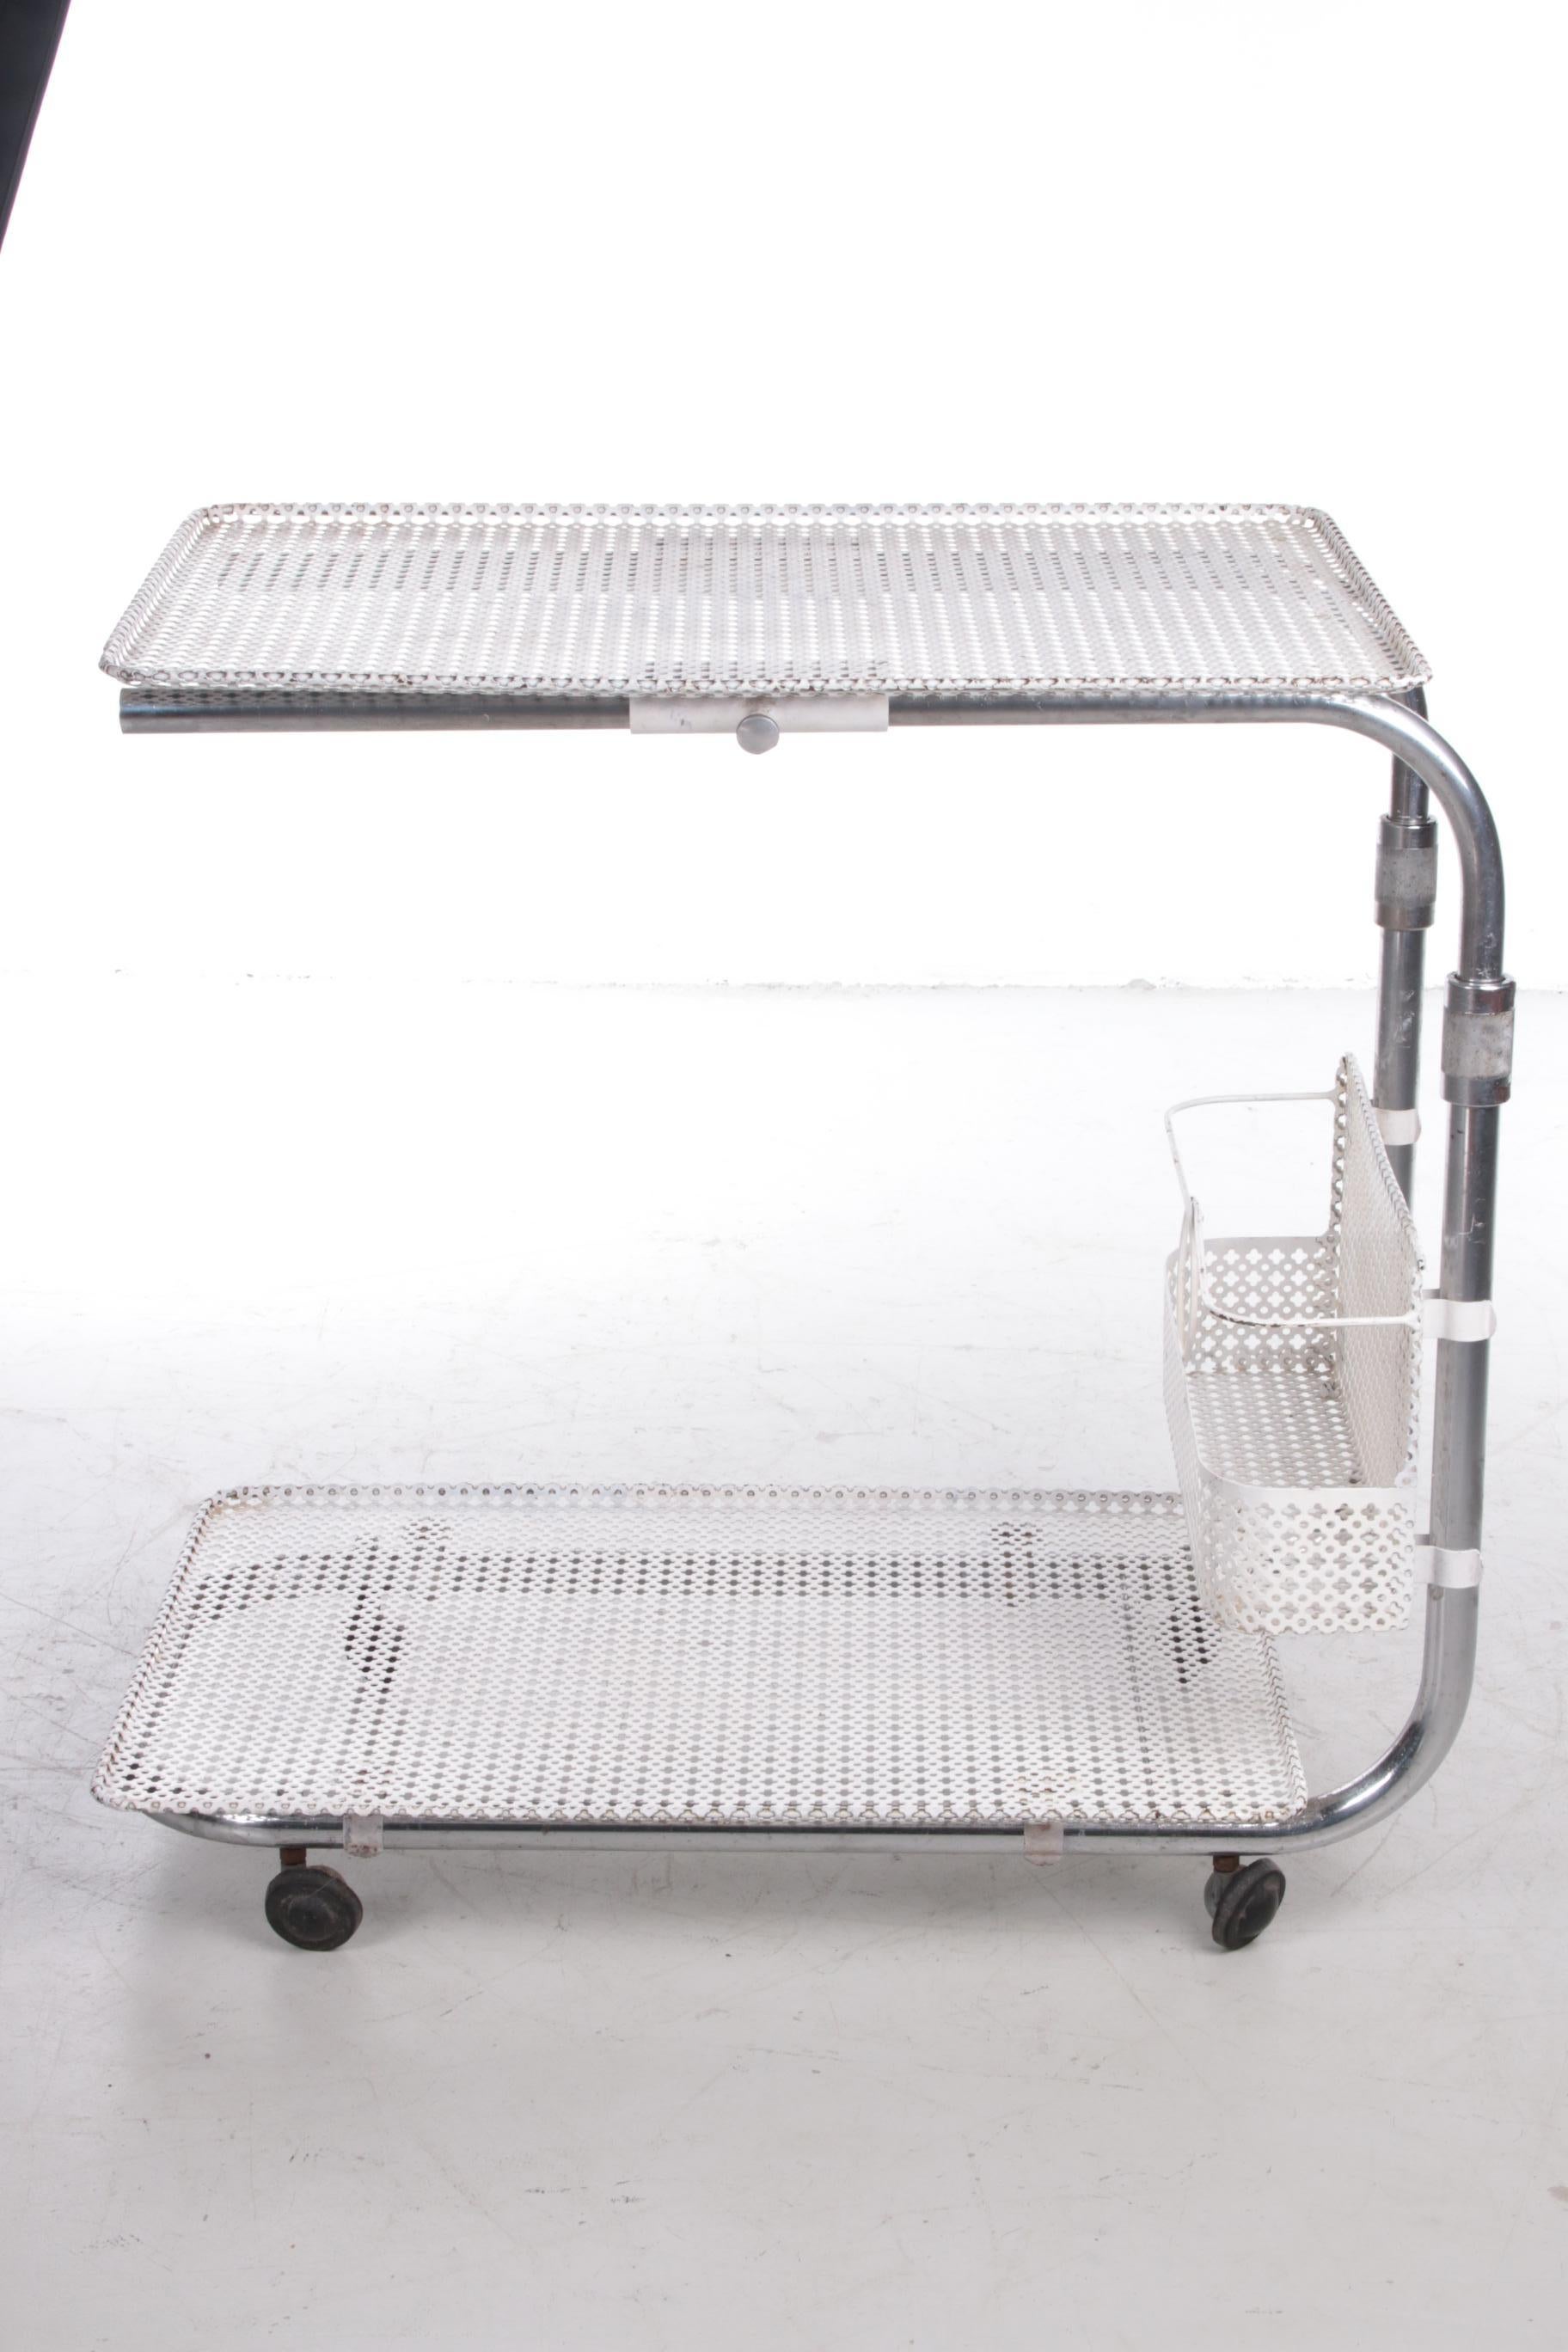 Chrome Vintage Metal Trolley by Mathieu Mategot, 1960s For Sale